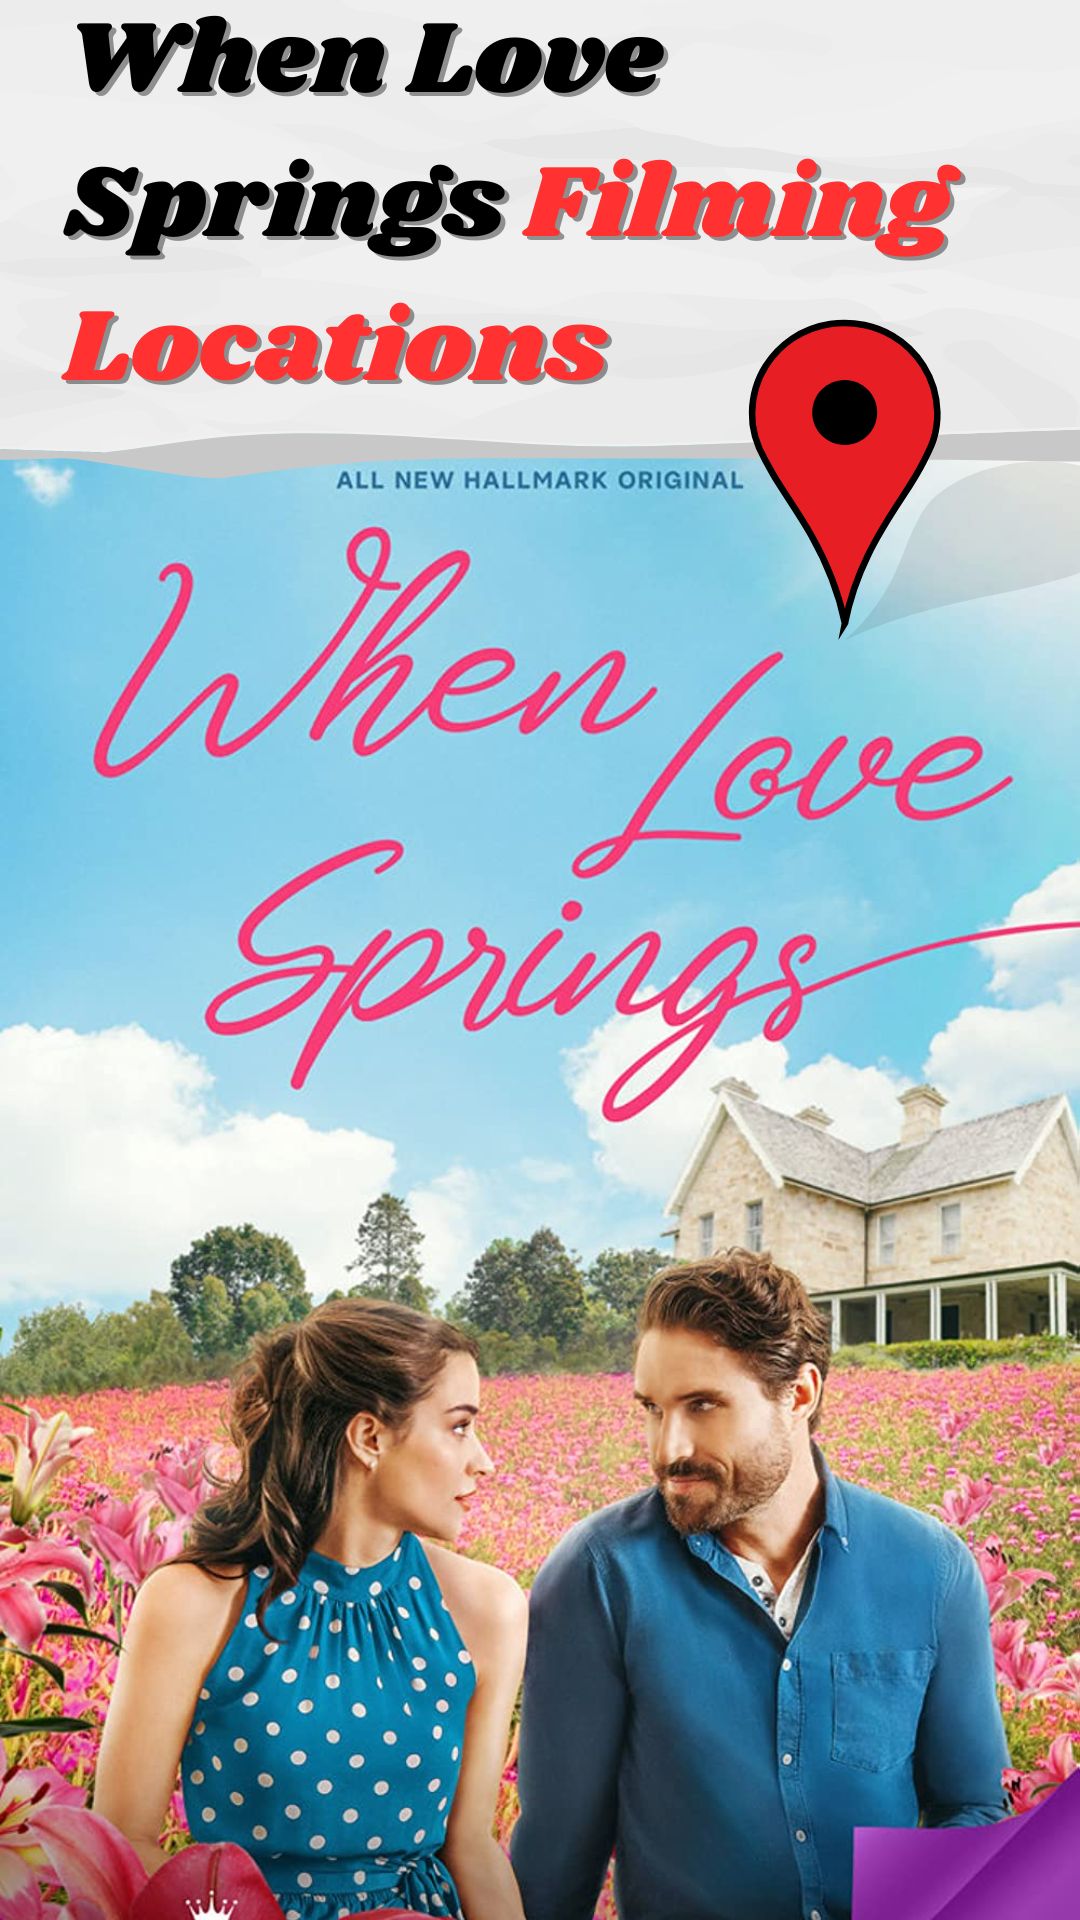 When Love Springs Filming Locations